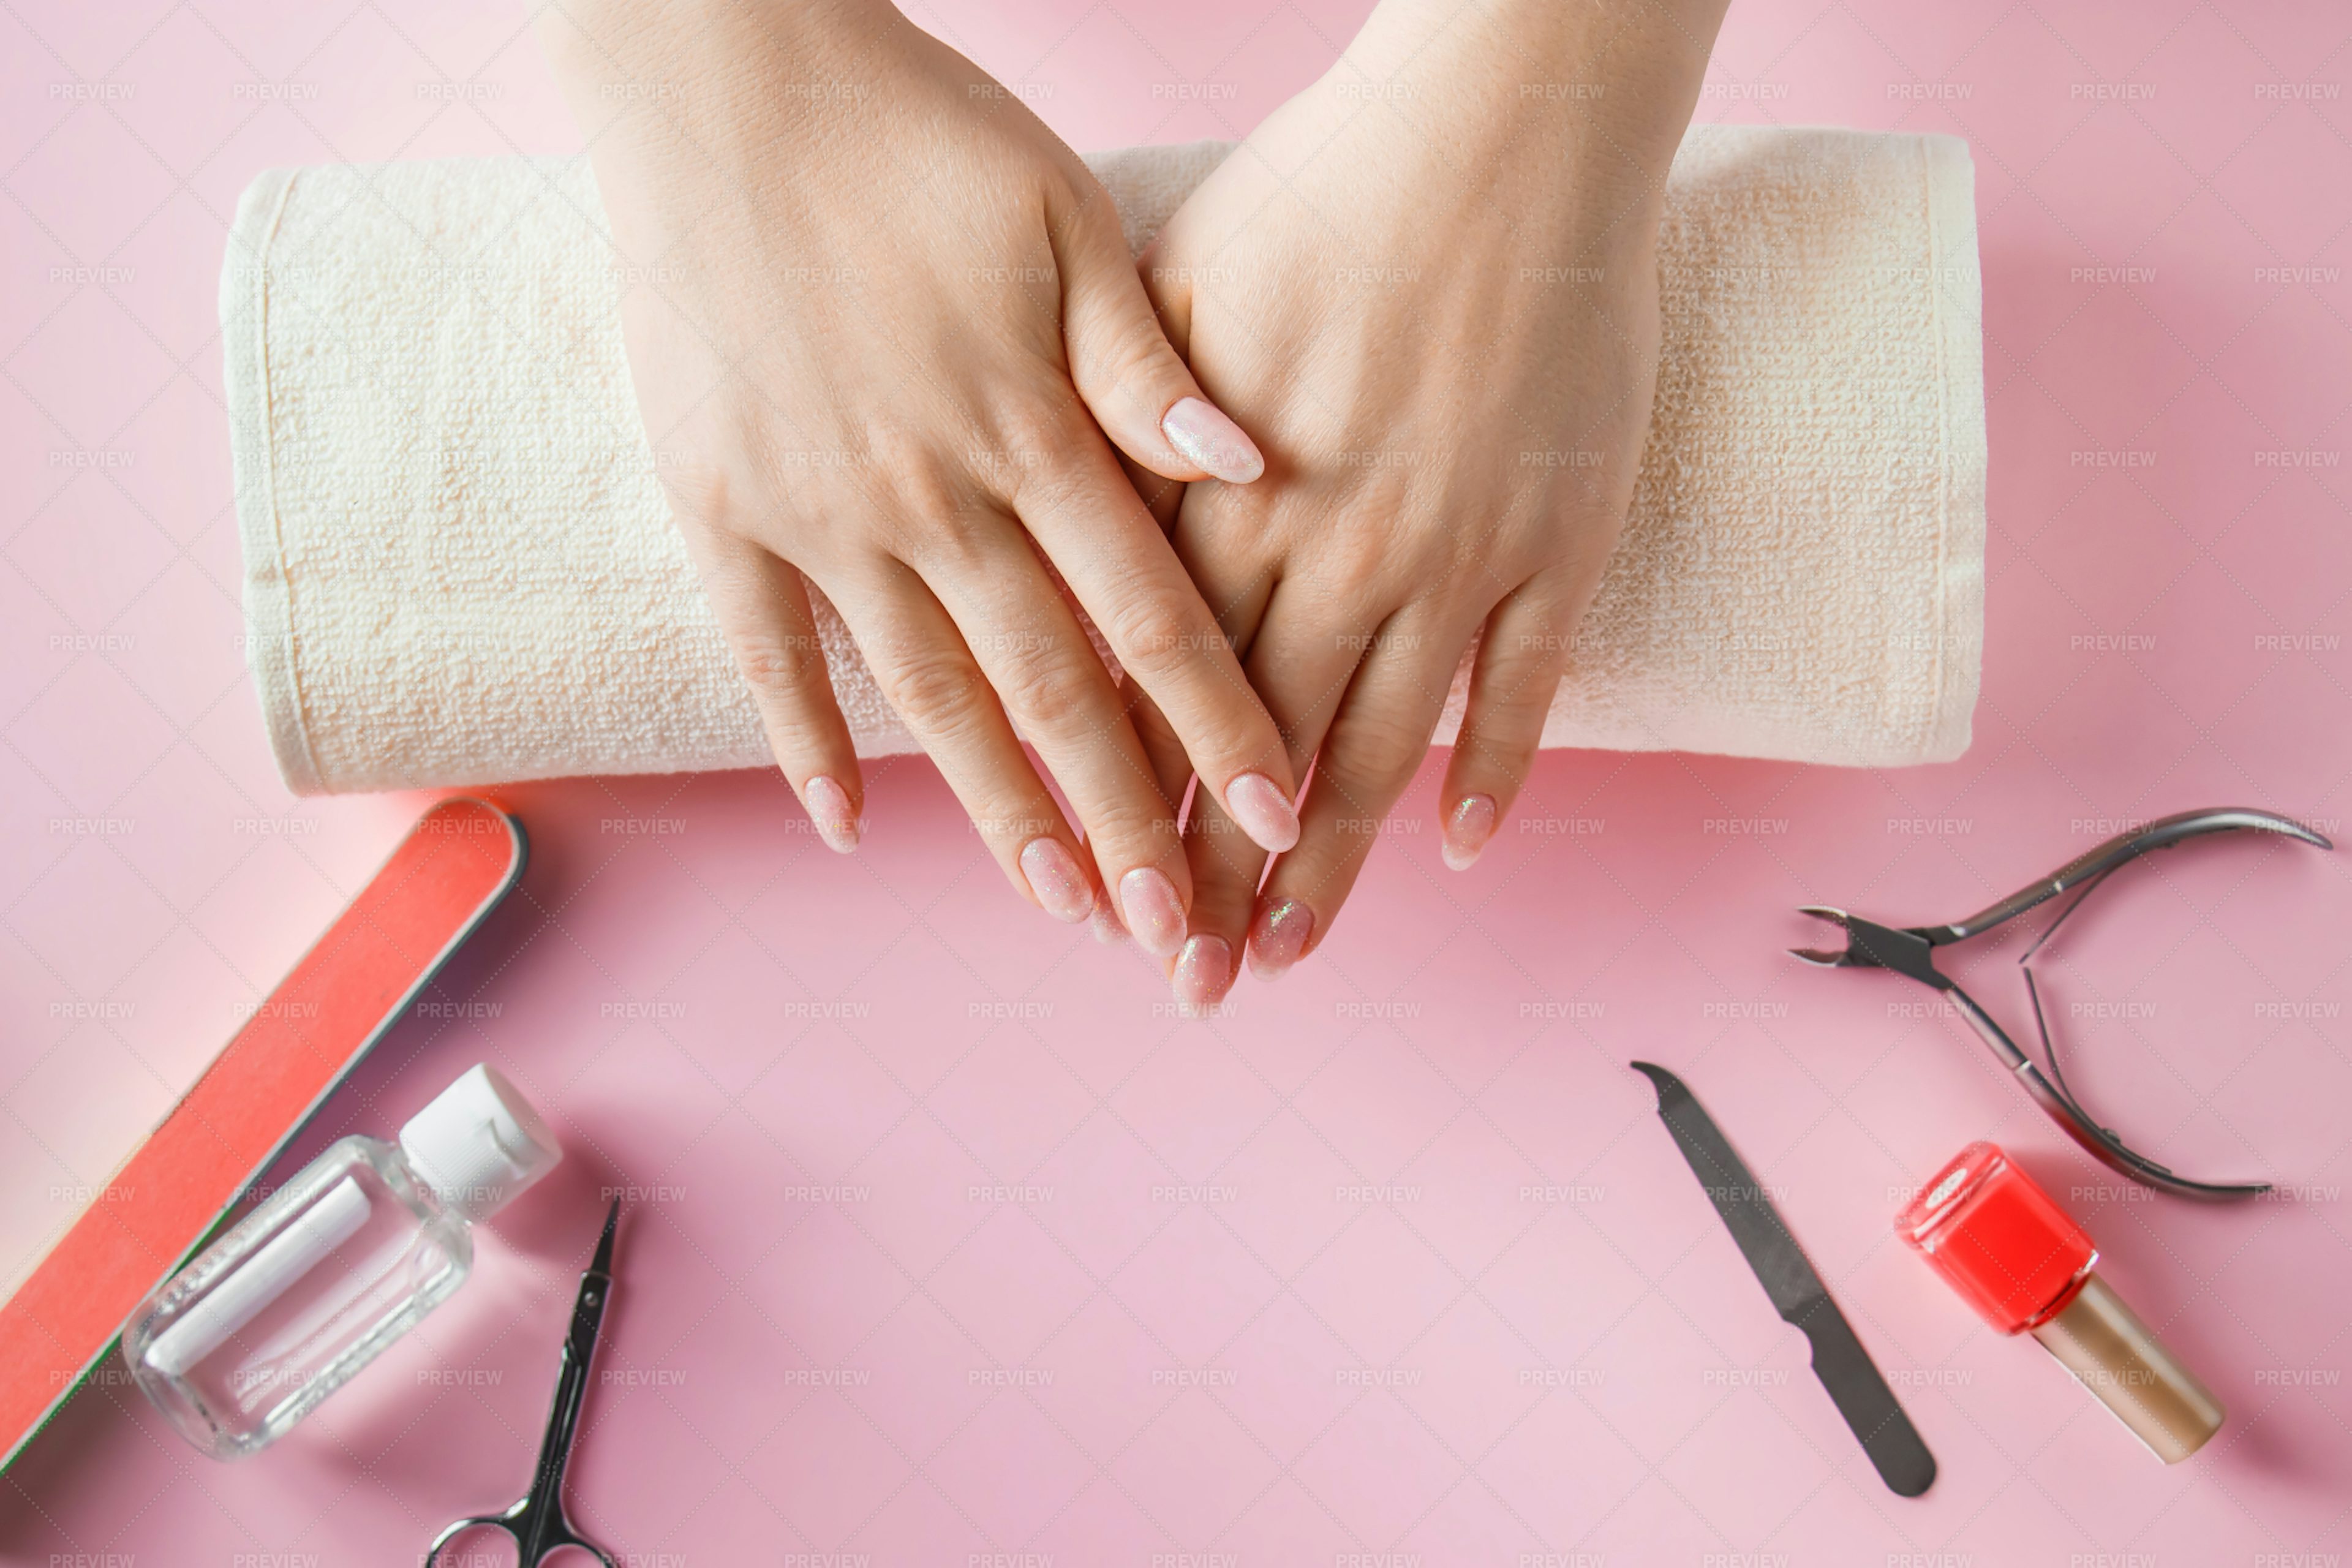 3. DIY Nail Care Tips - wide 4